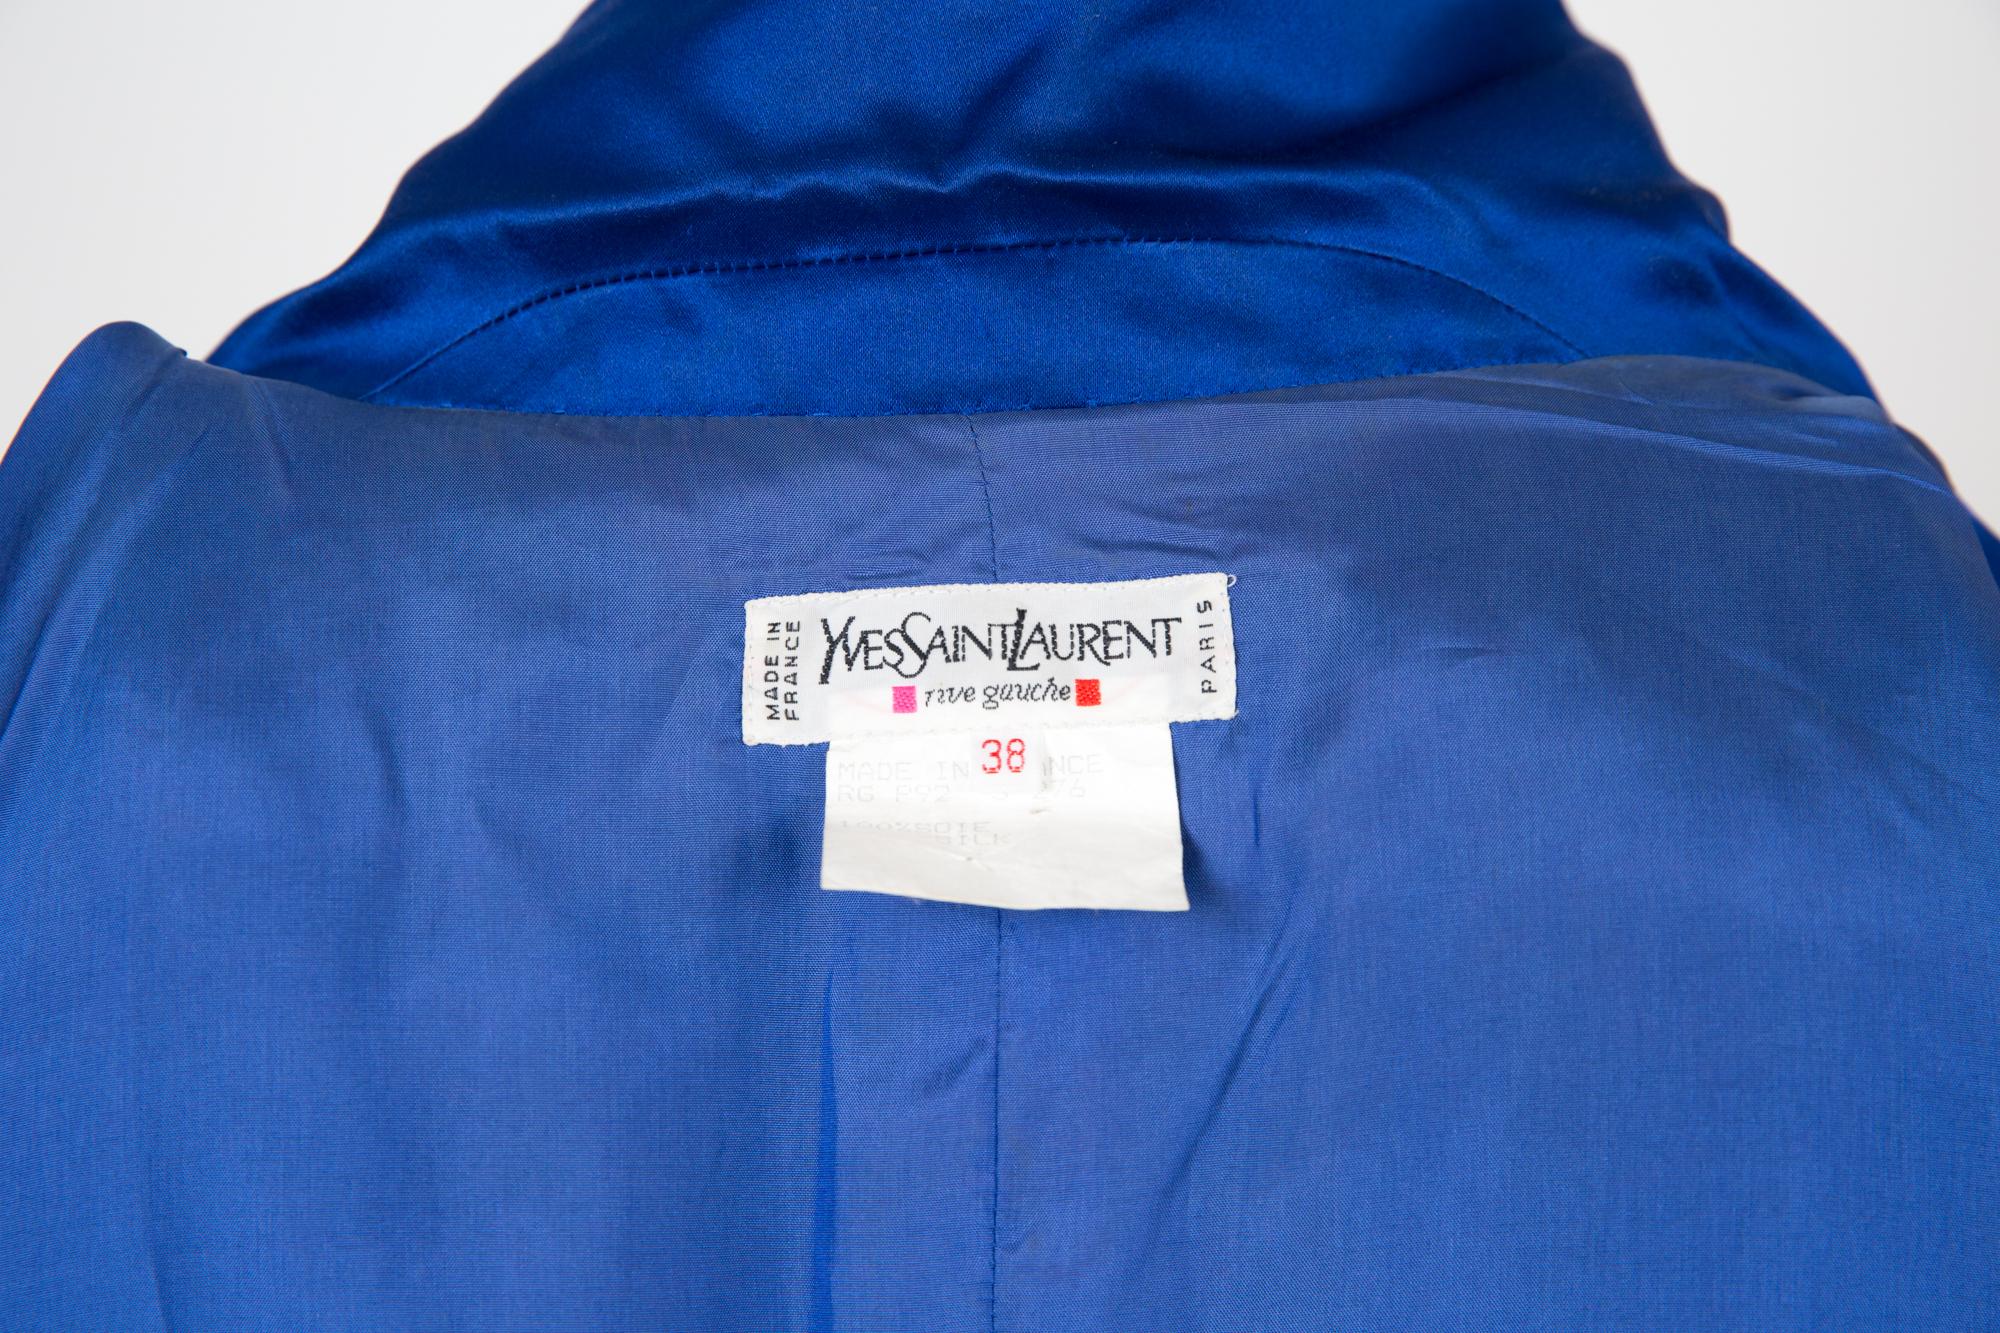 1992 YSL Yves Saint Laurent blue cobalt silk jacket featuring a long length, gold-tone buttons, large buttoned cuffs,  two large patched pockets.
Composition: 100% Silk 
Circa 1992
Label size 38fr/US6 /UK10
In good vintage condition. Made in